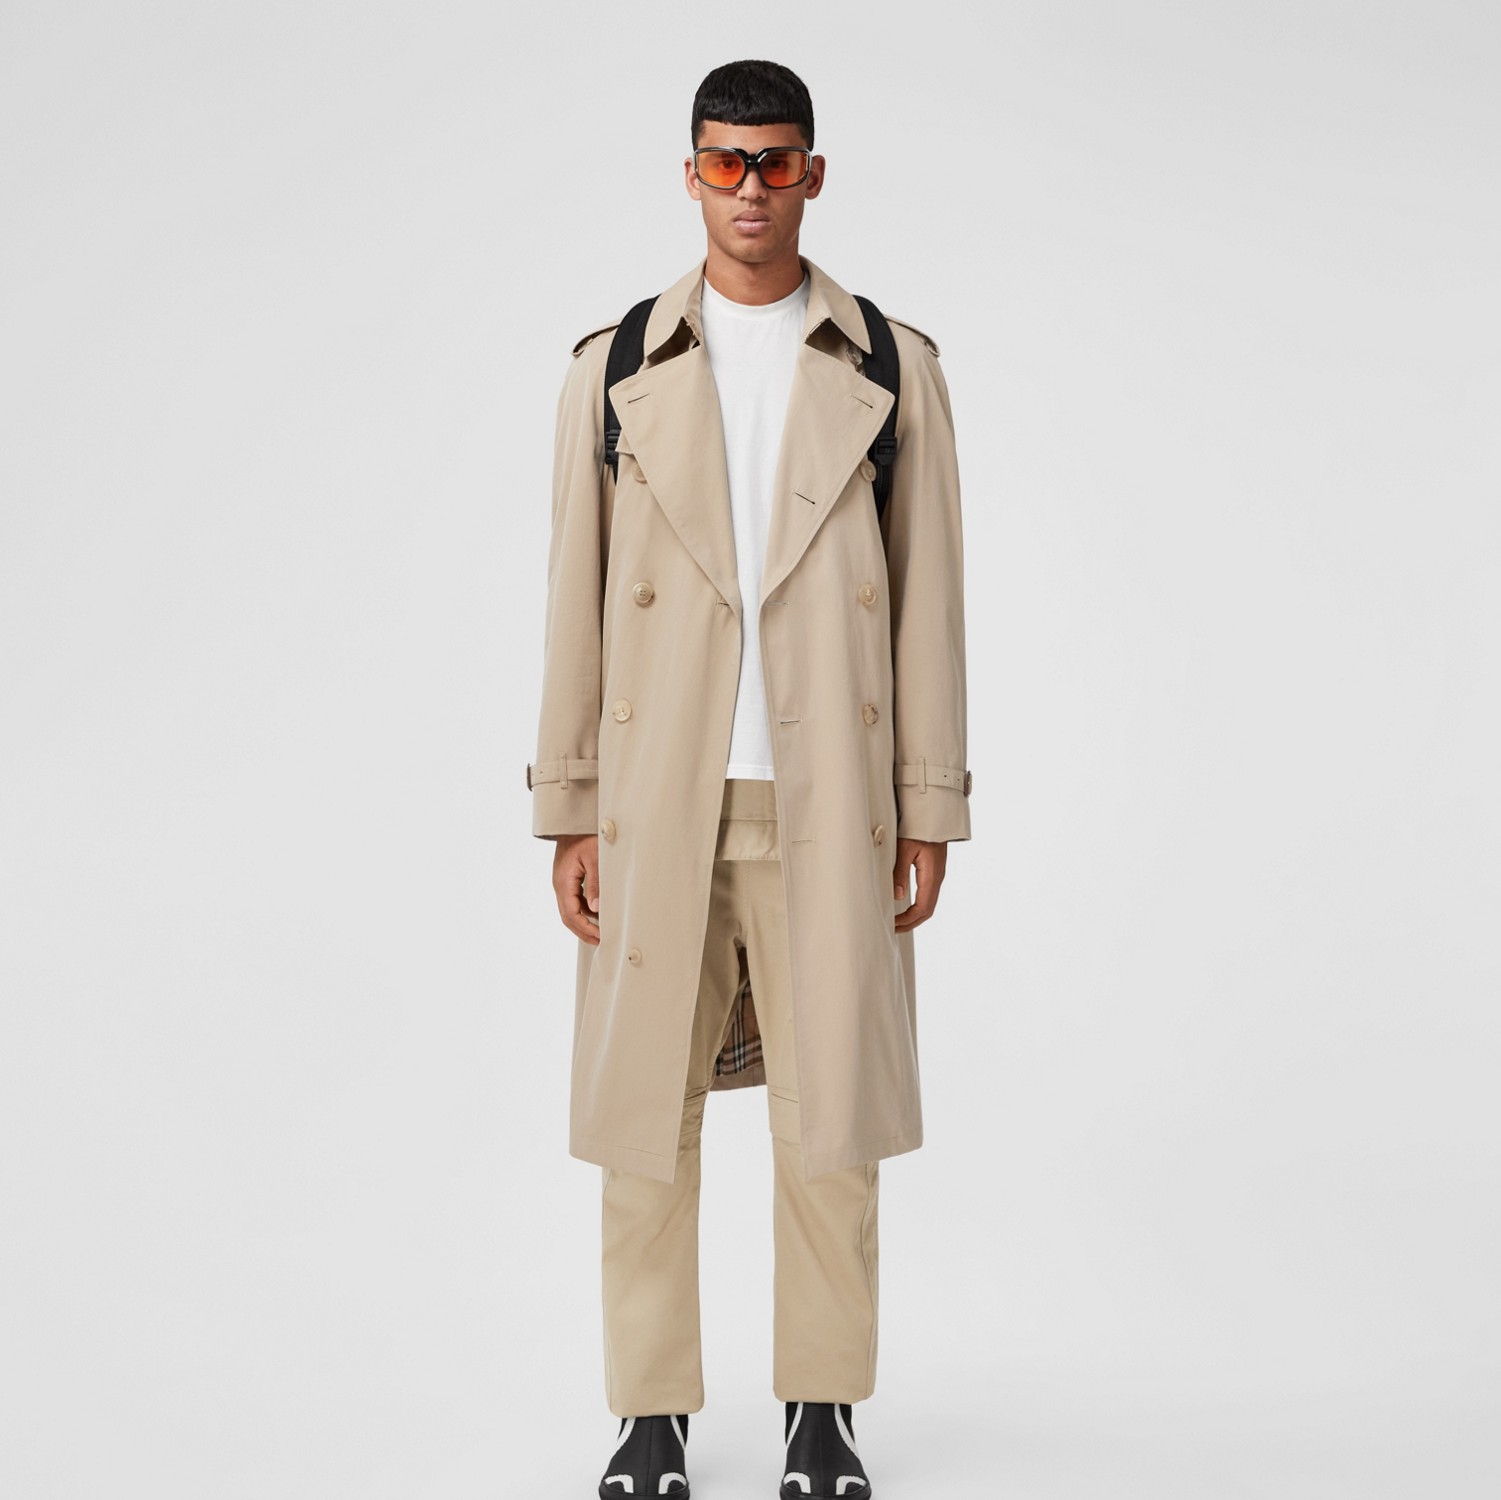 The Westminster Heritage Trench Coat